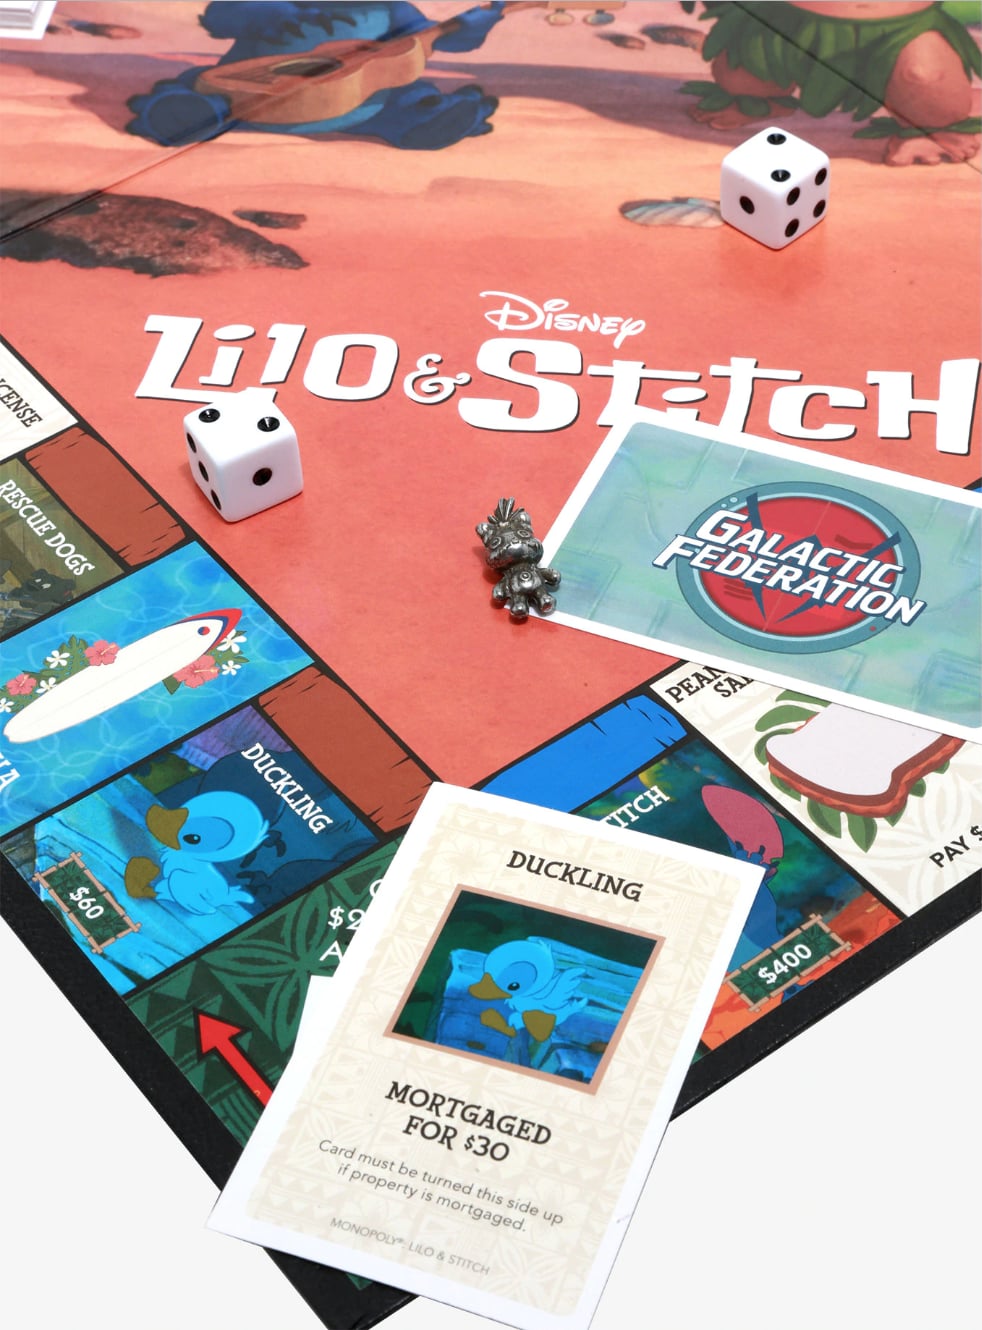 Disney's Lilo & Stitch Monopoly Board Let's You Buy and Trade Your